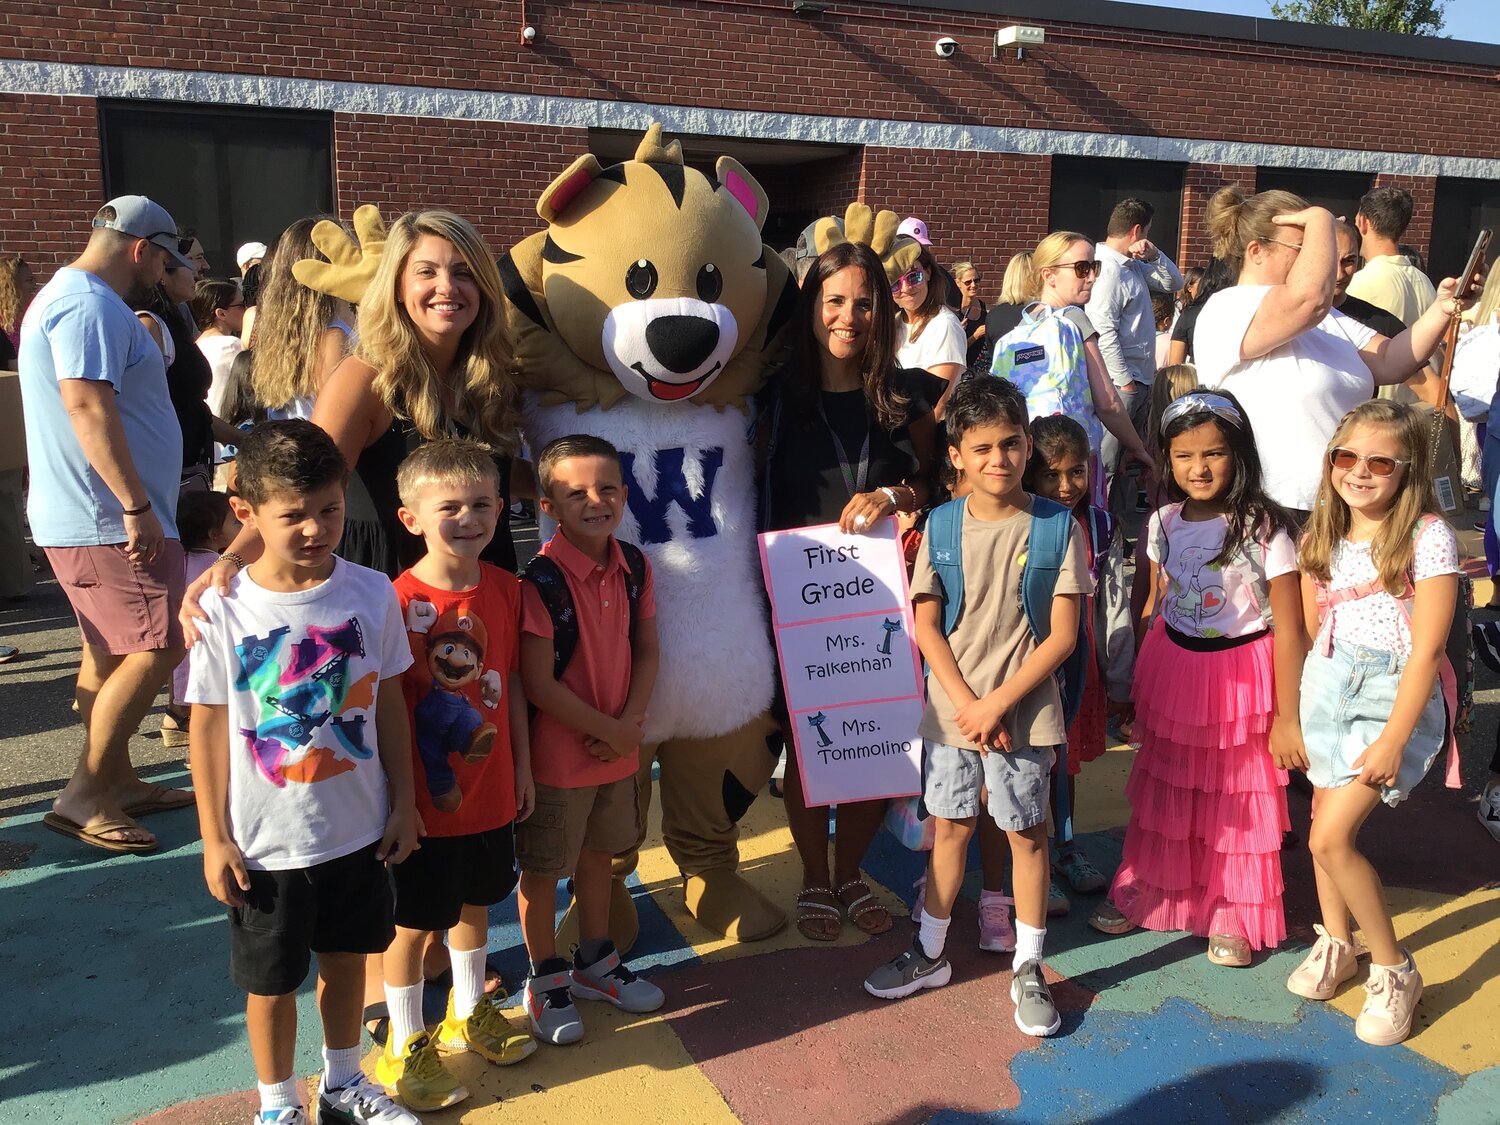 First grade students in Mrs. Falkenhan’s and Mrs. Tommolino’s class pause for a picture with the school mascot.